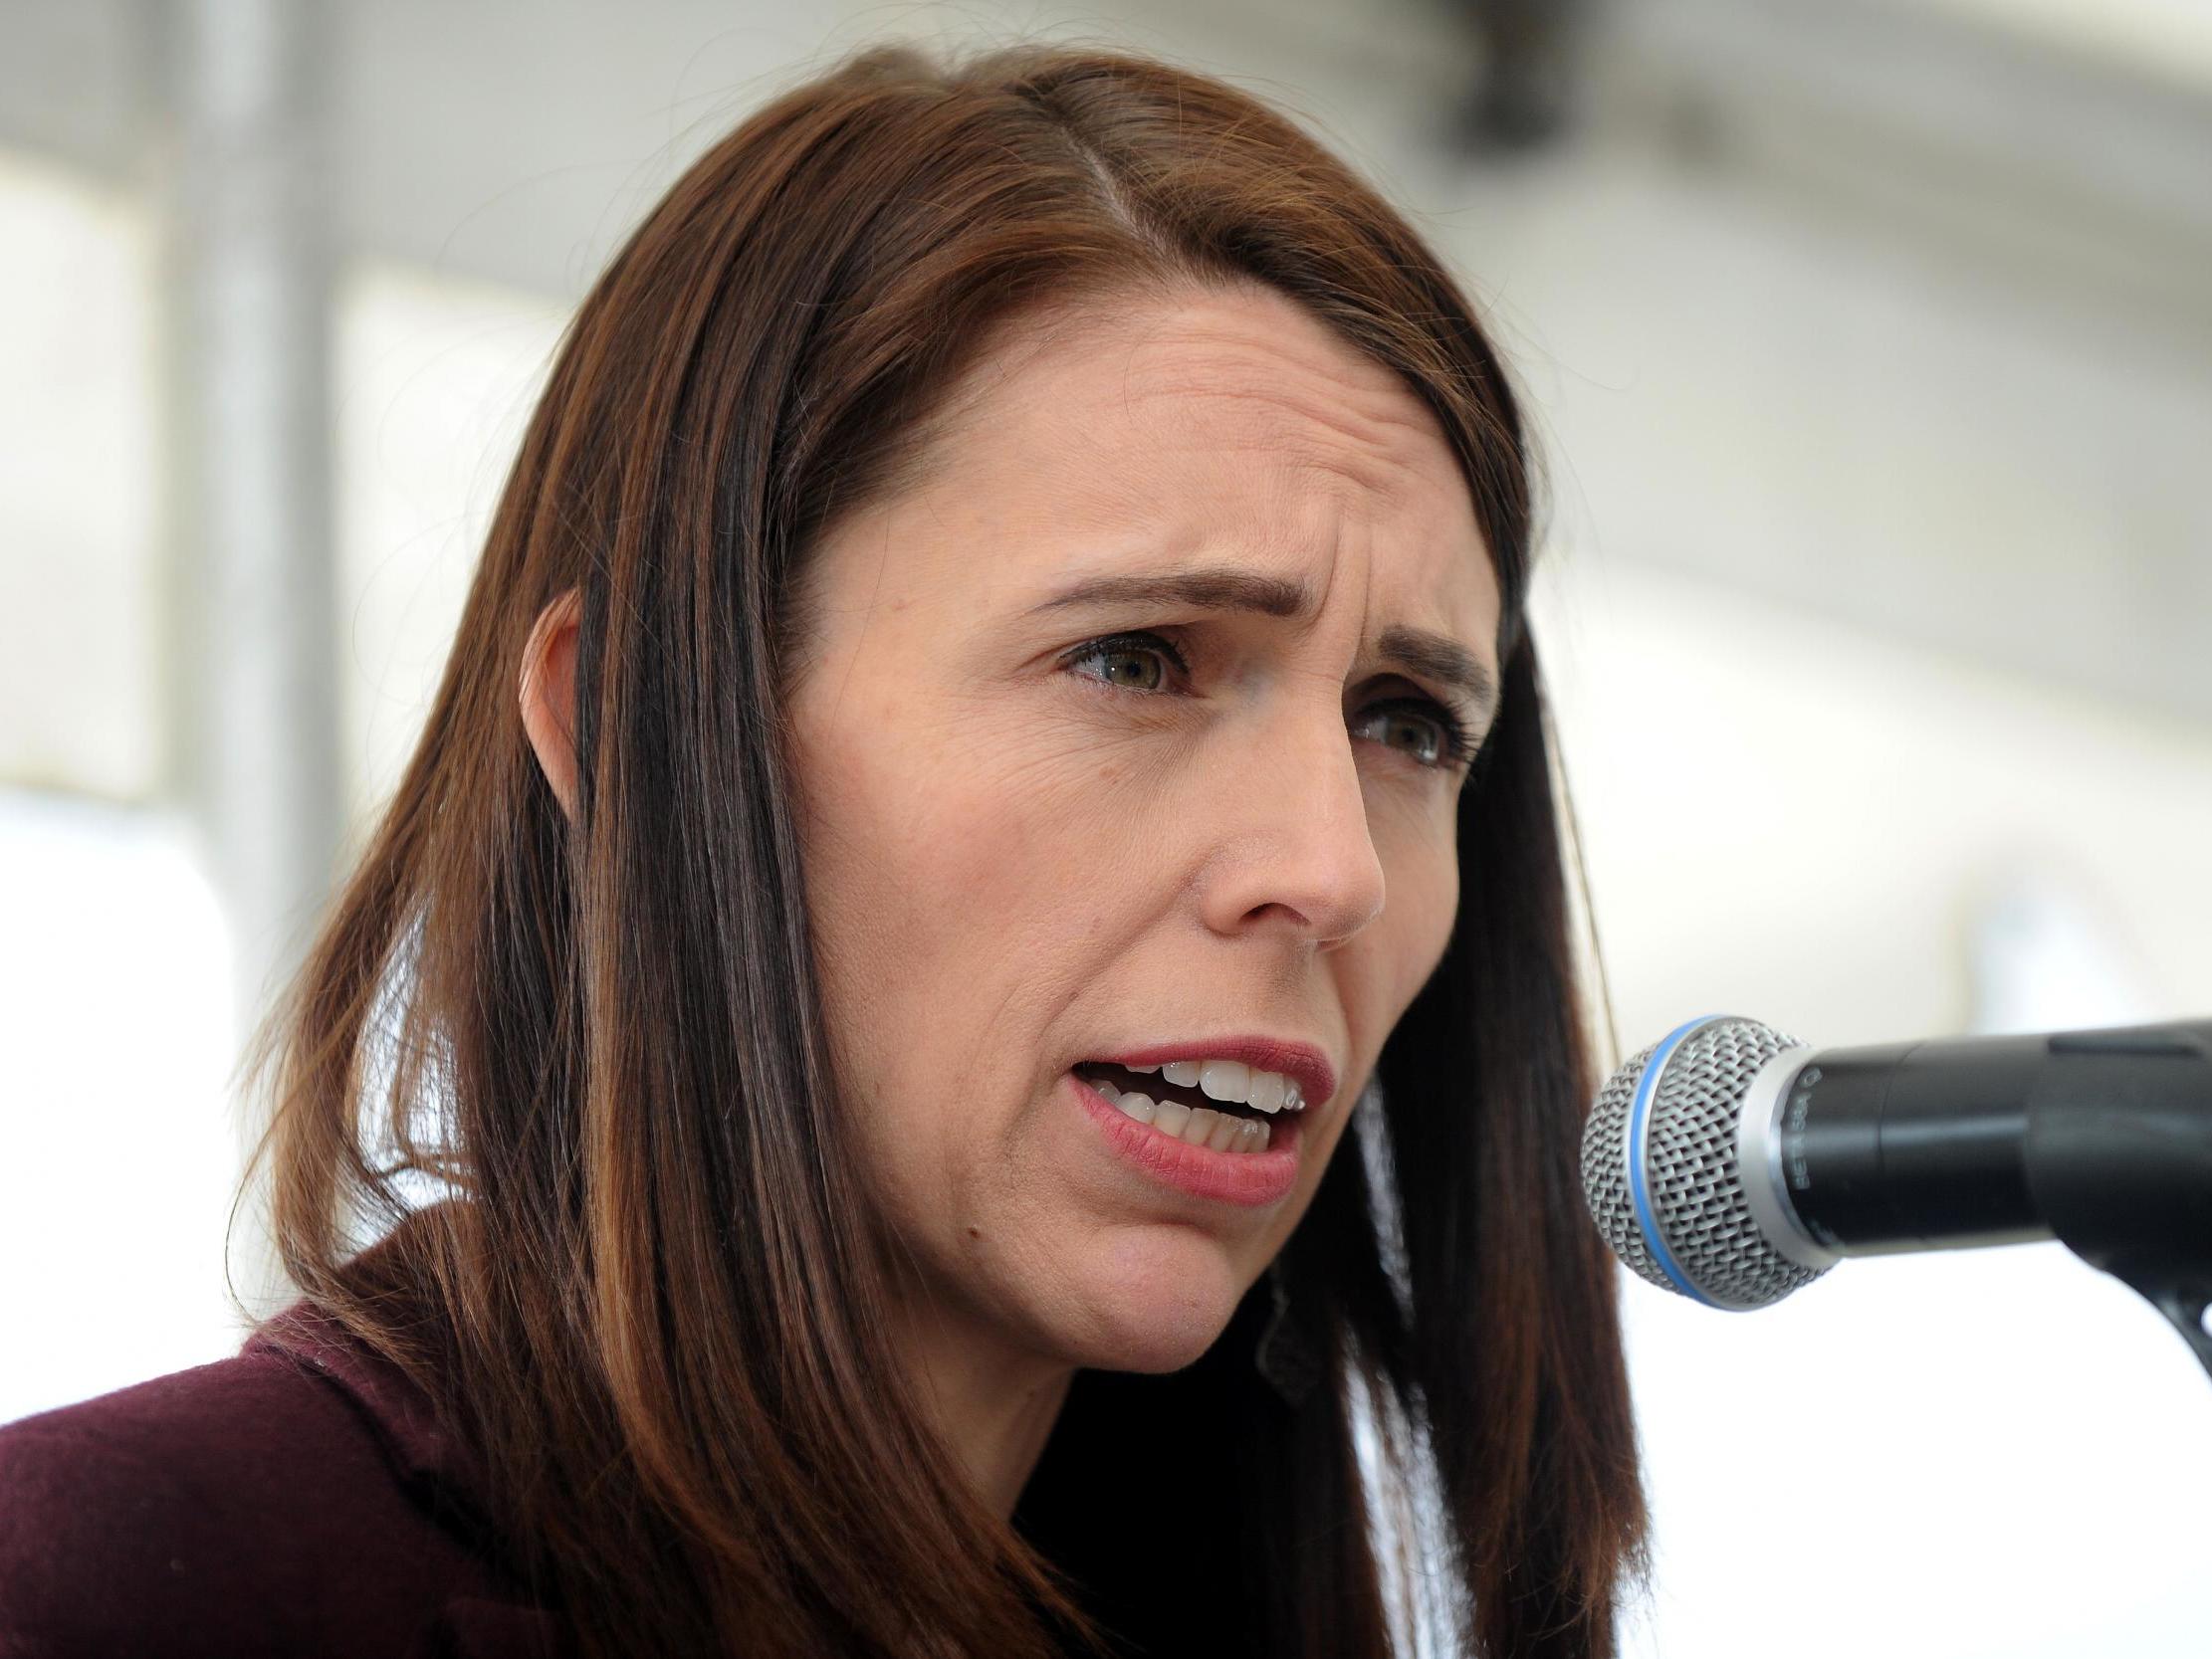 Nearly 28,000 people have quarantined since prime minister Jacinda Ardern introduced the measure